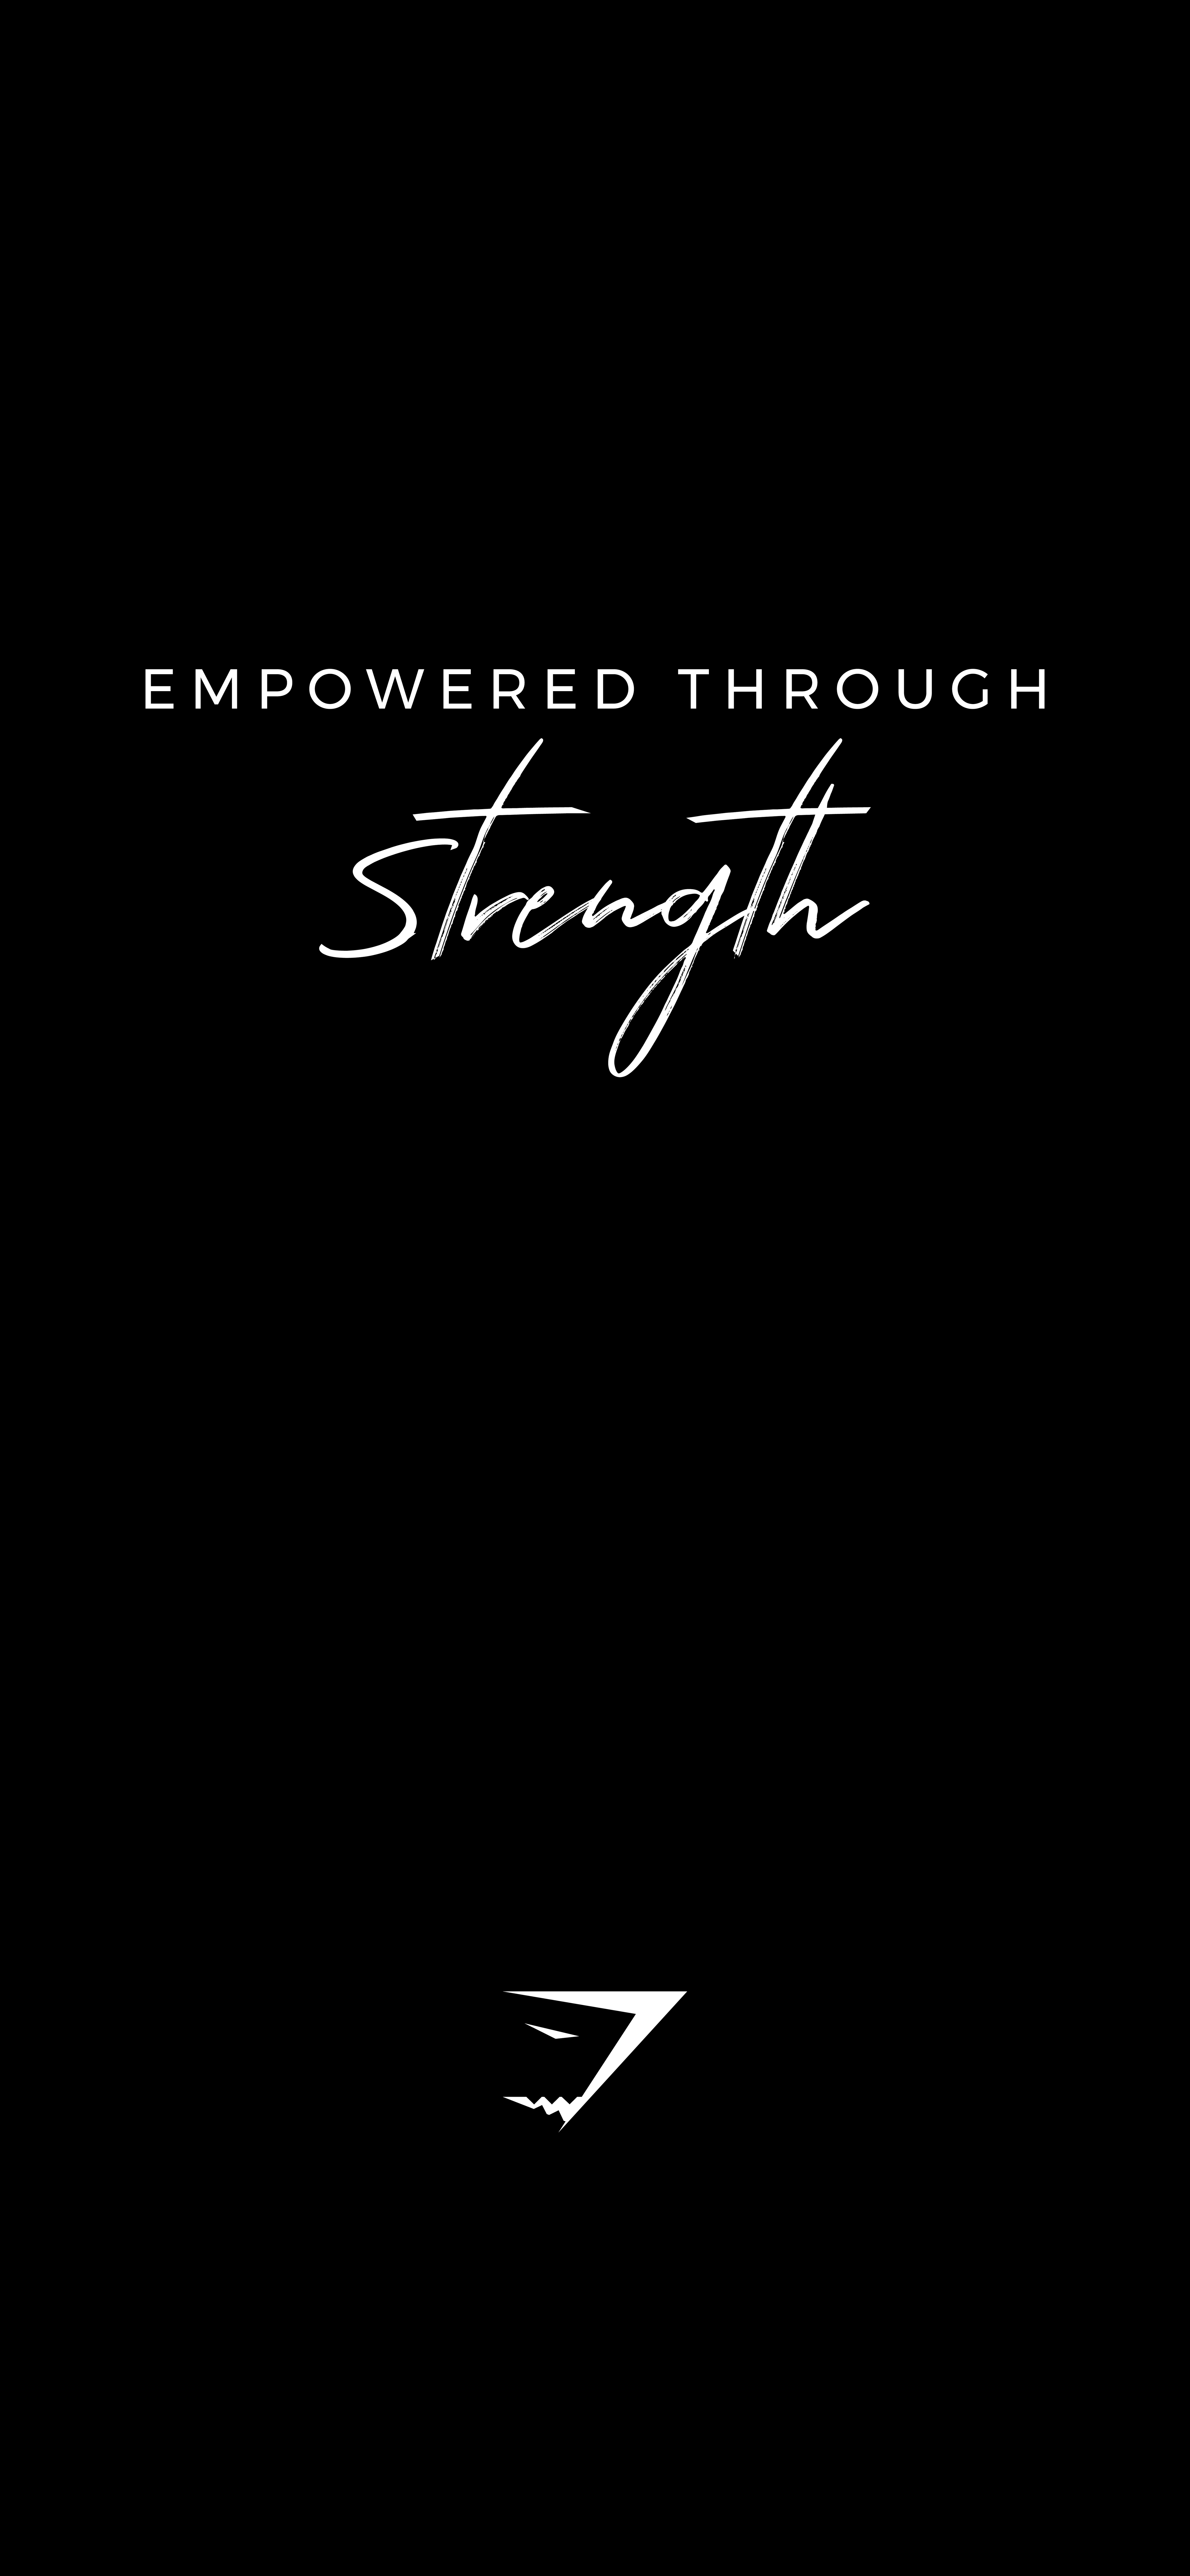 The Official Gymshark wallpaper, perfect for your iPhone Plus, X